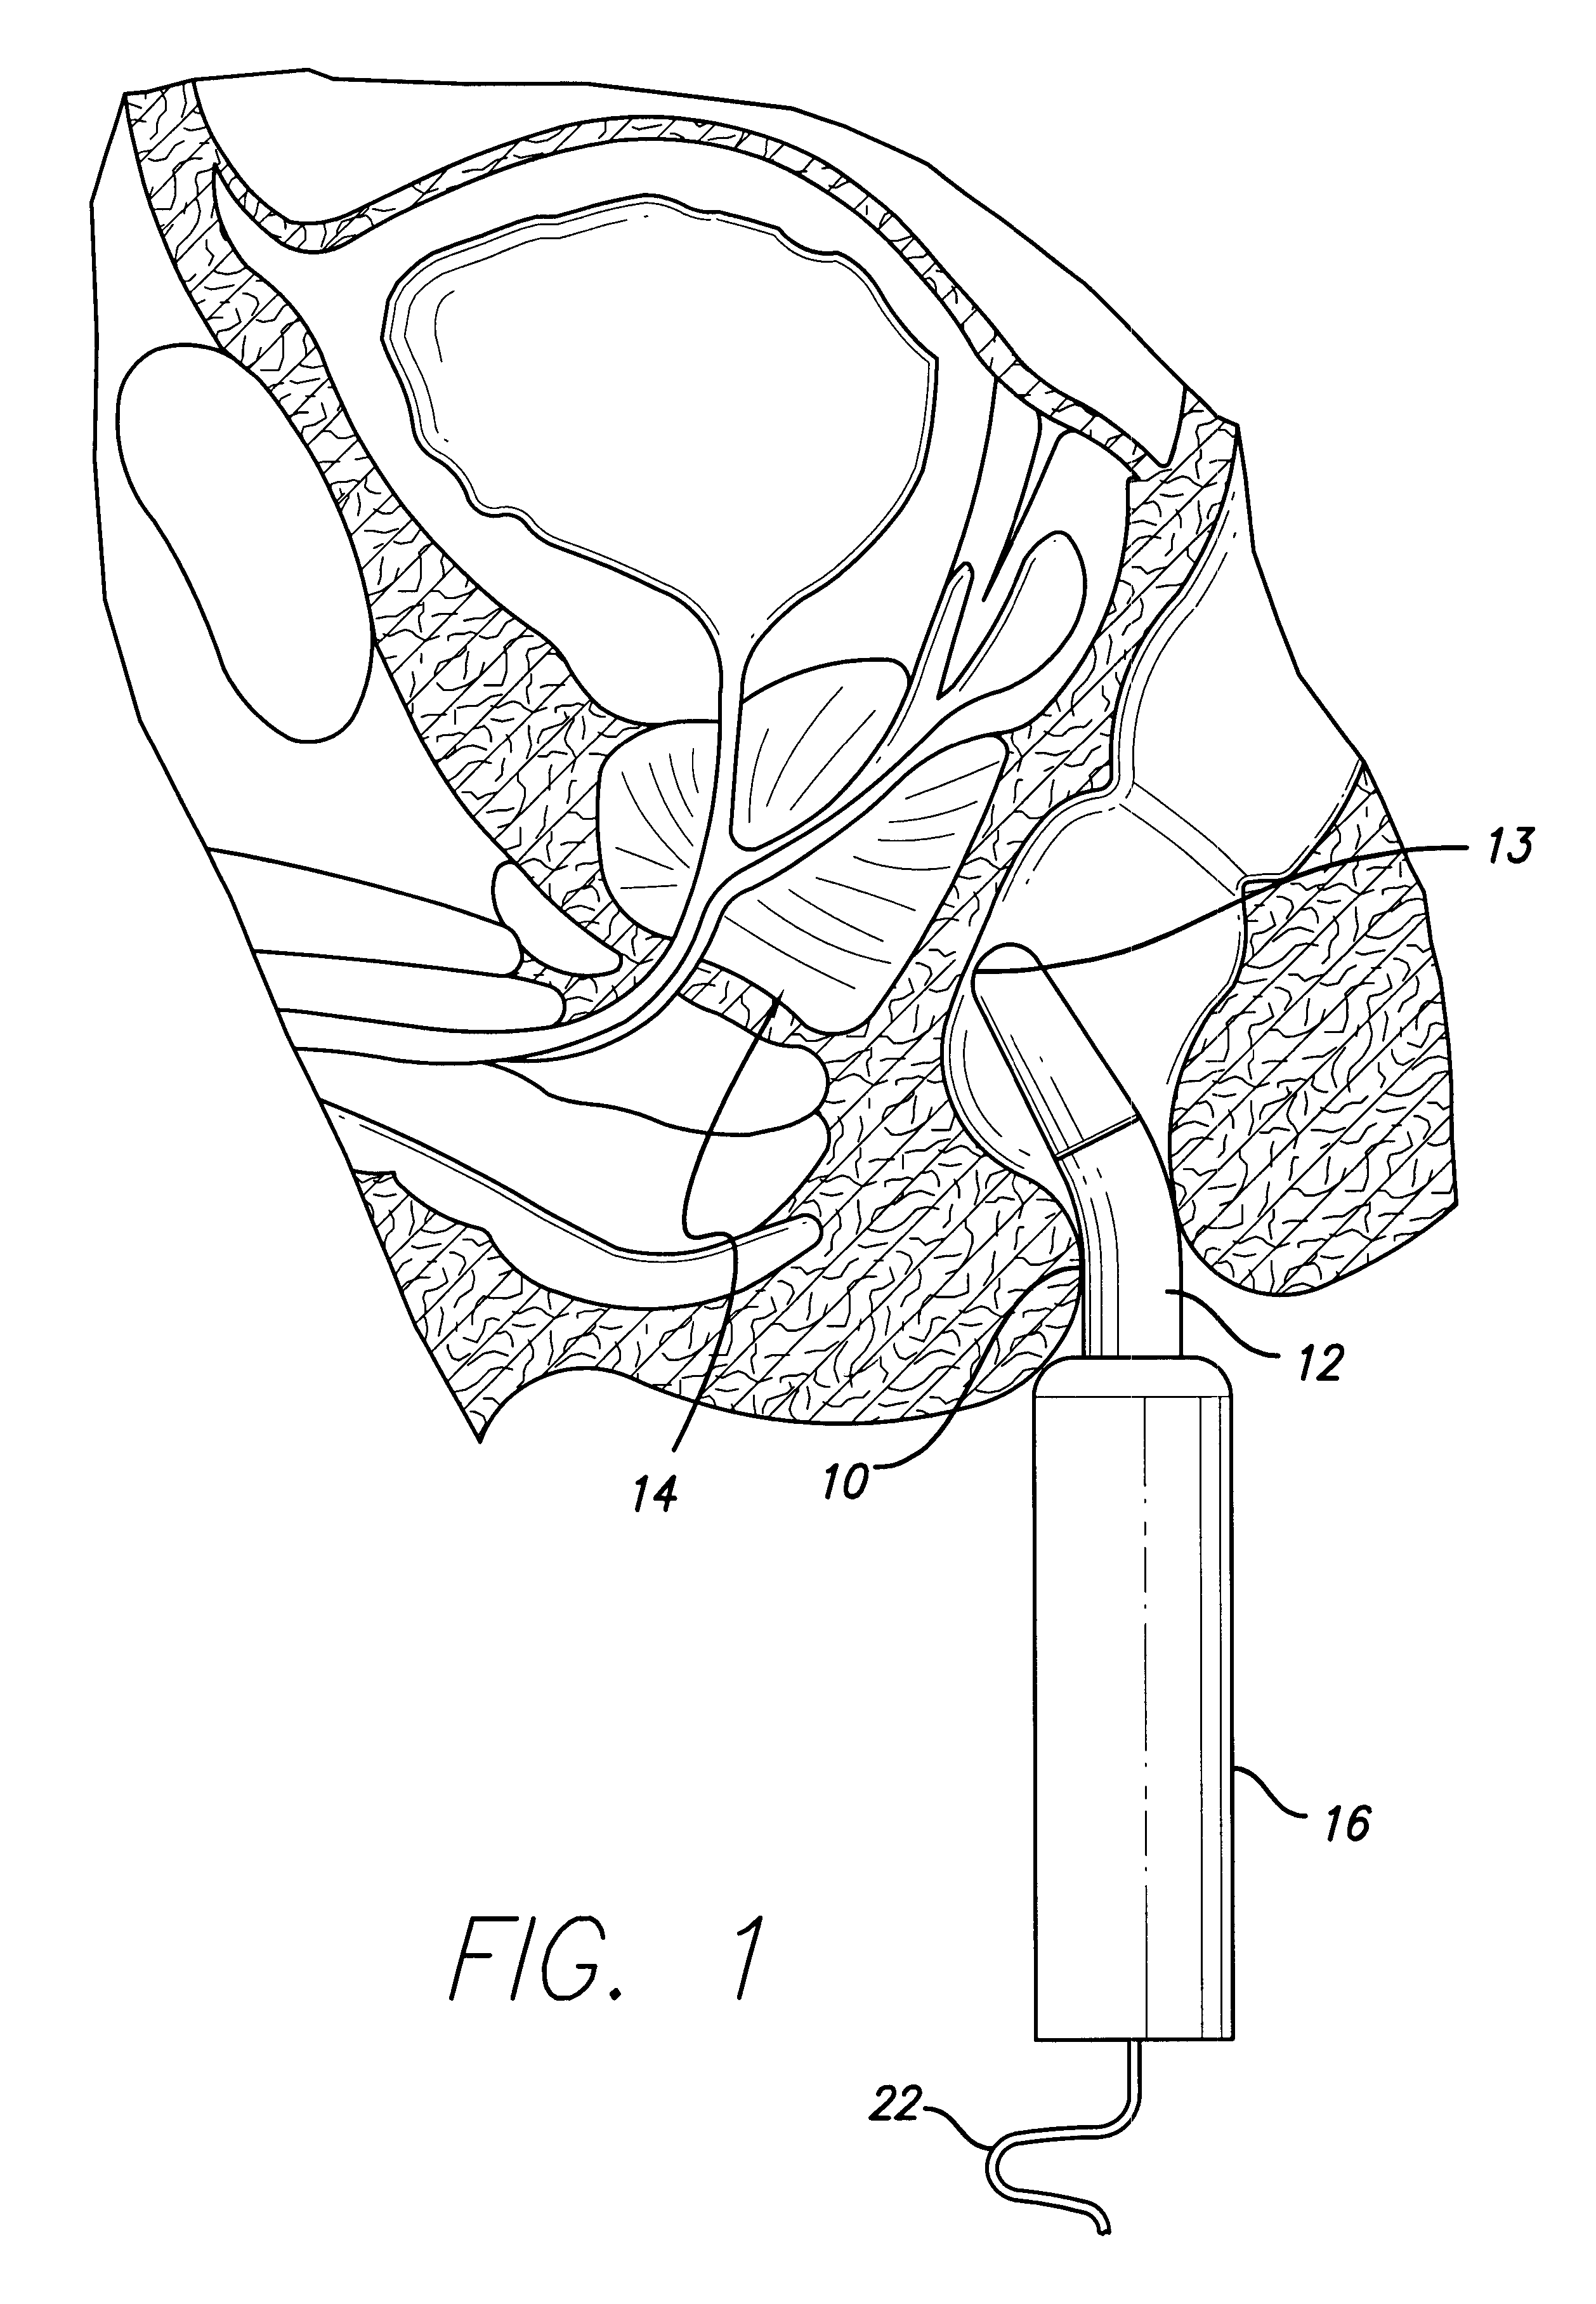 Ultrasound system for disease detection and patient treatment